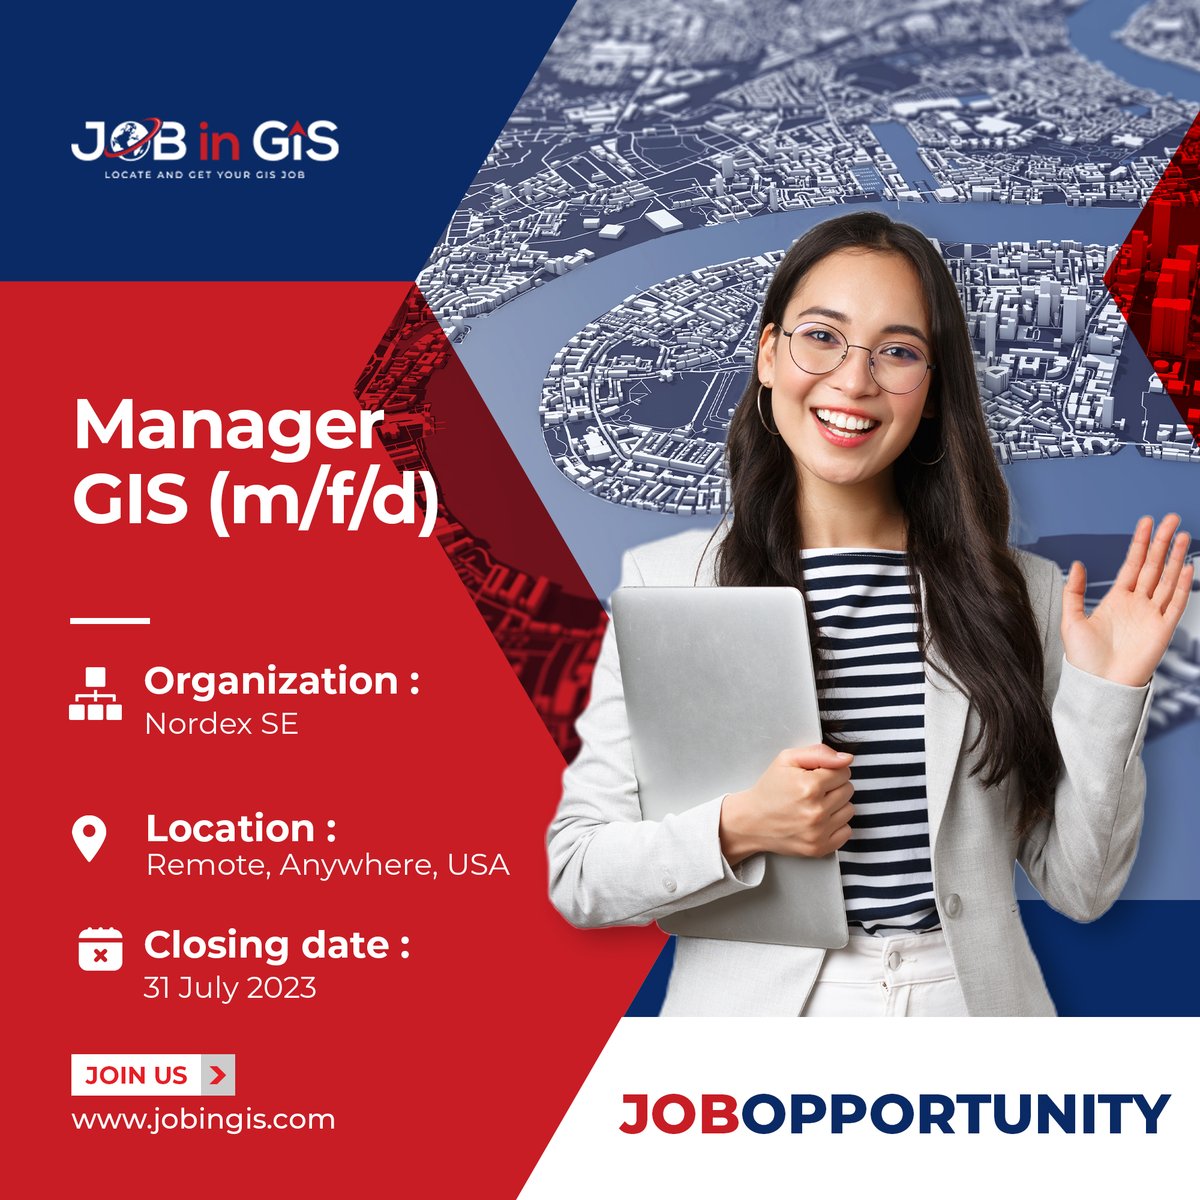 #jobingis : Nordex SE is hiring a Manager, GIS (m/f/d)
📍Location : #remotework , Anywhere, #USA 

Apply here 👉 : jobingis.com/jobs/manager-g…

#Jobs #jobsearch #cartography #Geography #mapping #GIS #geospatial #remotesensing #gisjobs #gischat #remoteworking